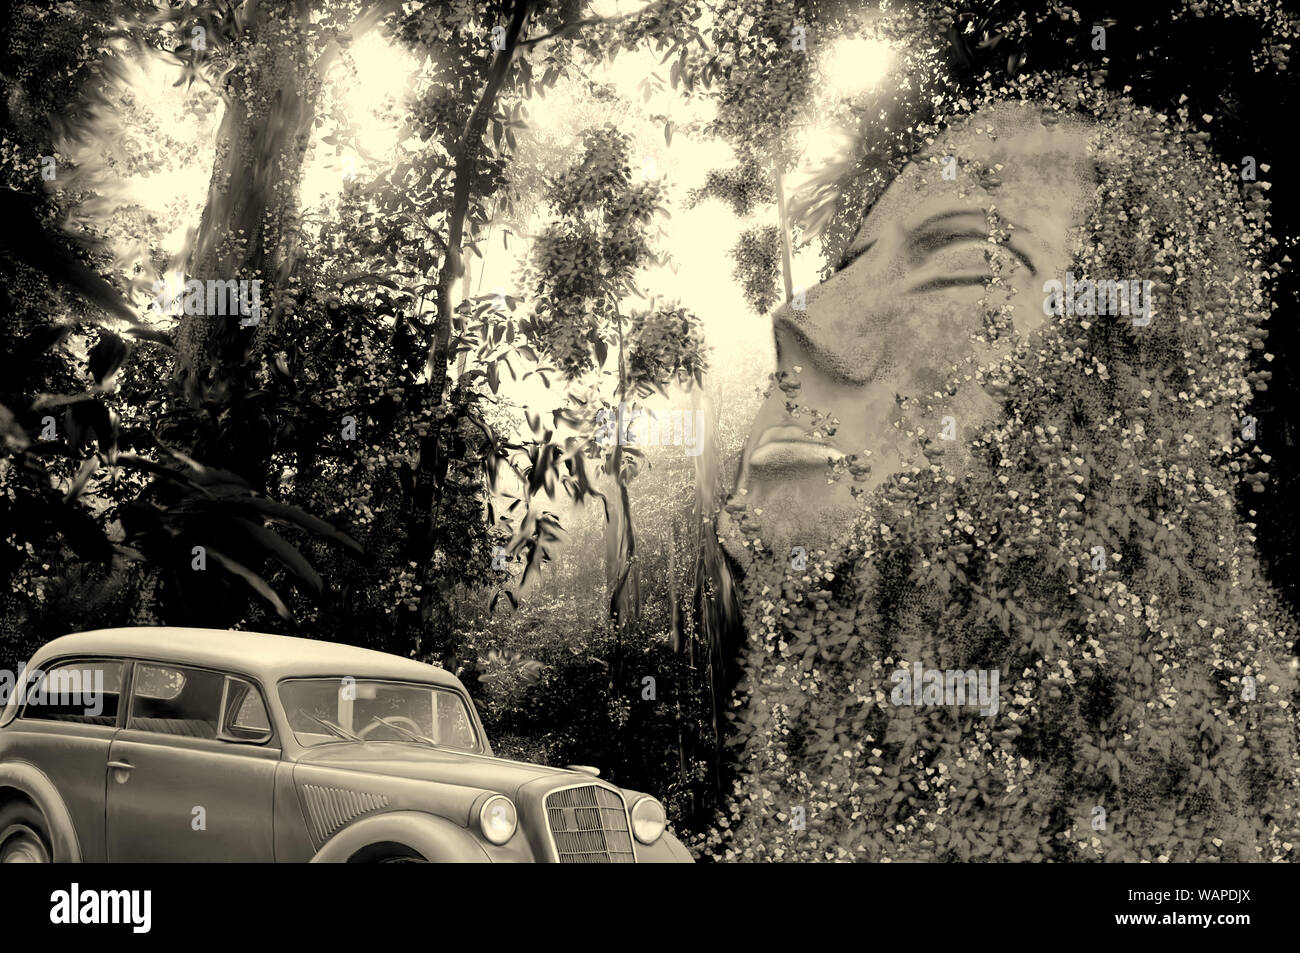 Painting of the conceptual Guatemalan stone head, which is considered a great mystery and treated as a forgotten history. Black and white version. Stock Photo